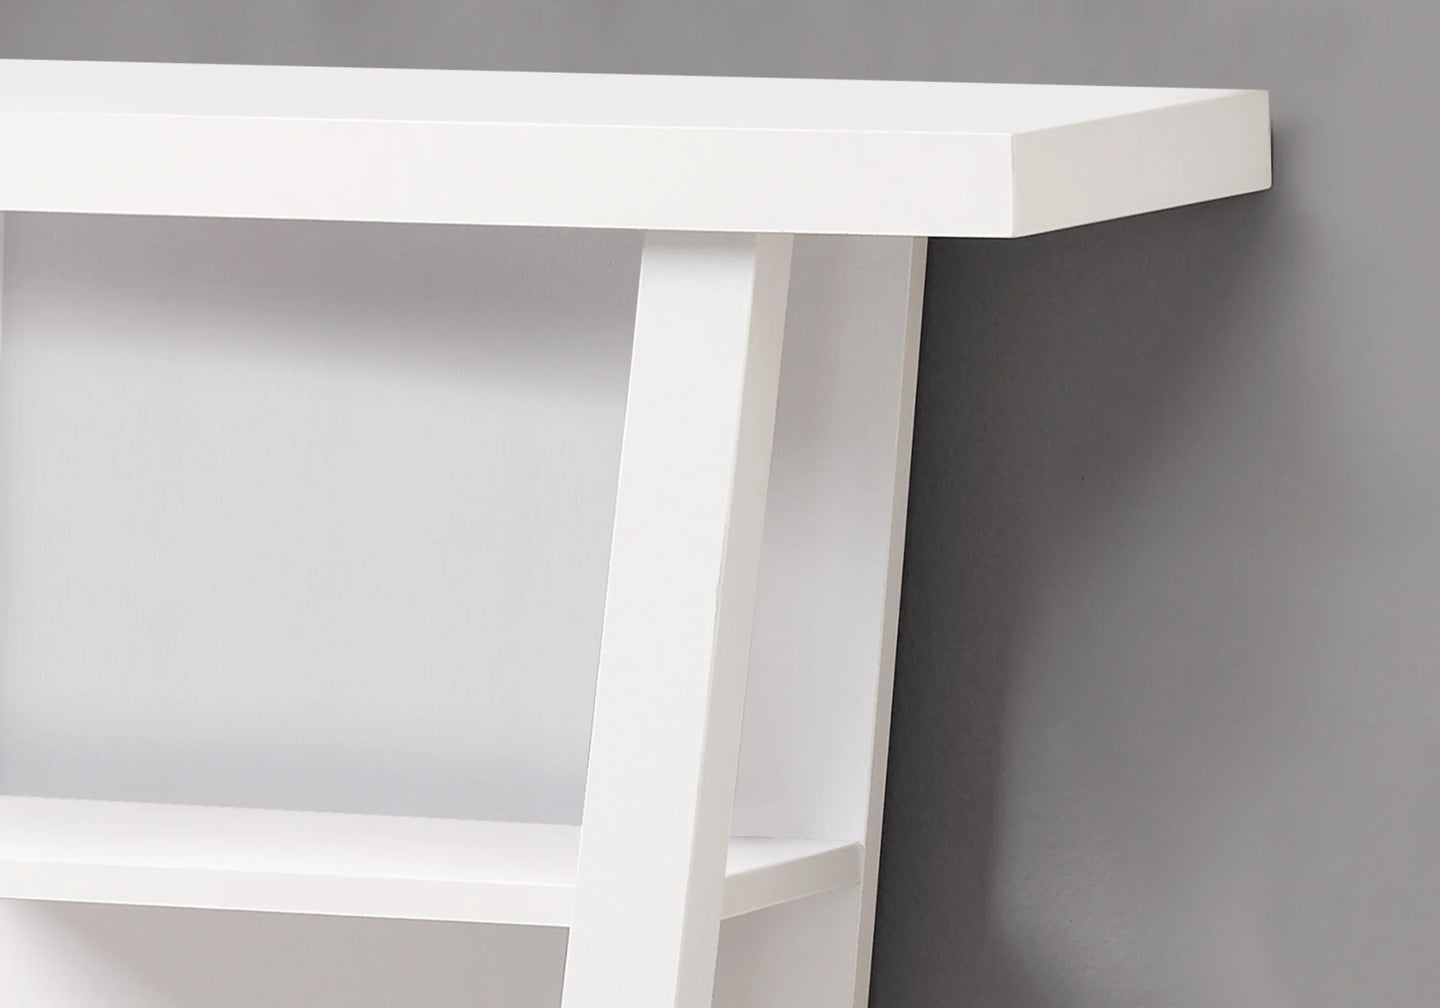 White Accent Table - I 2560